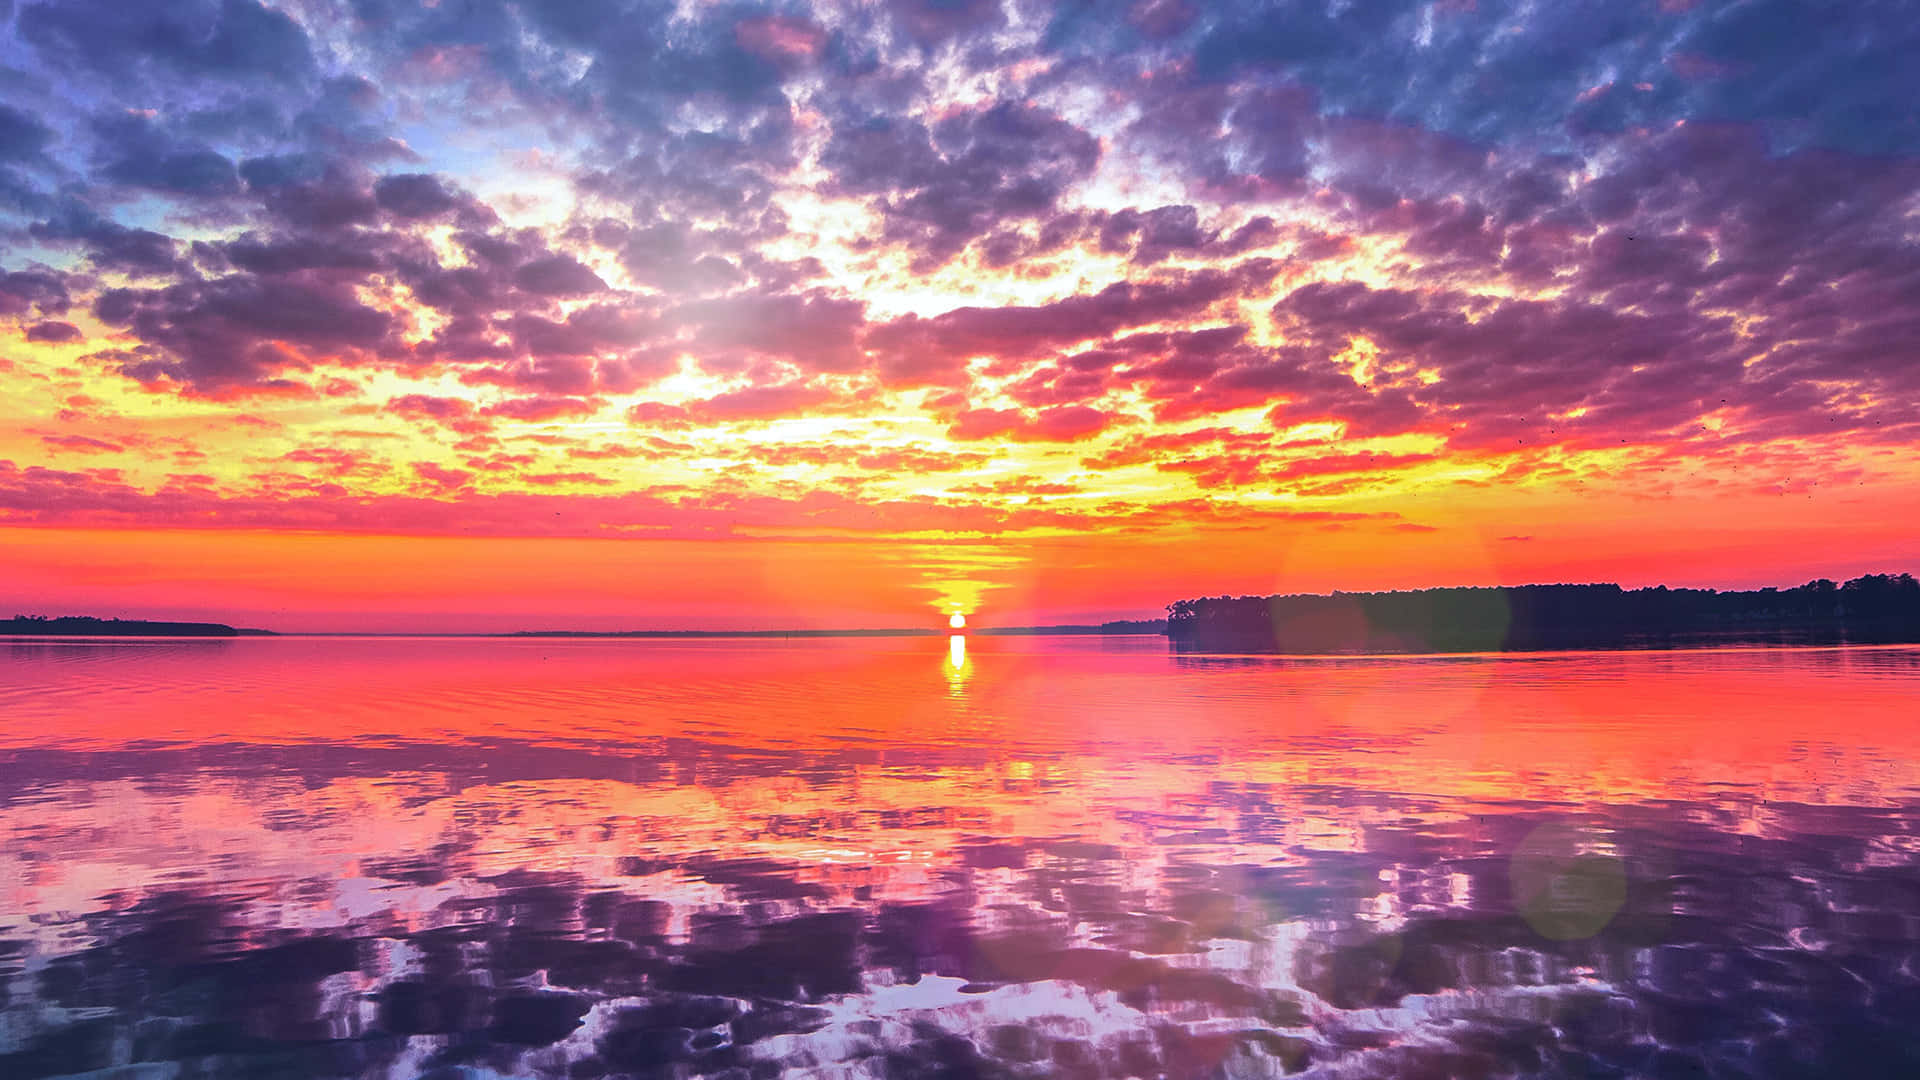 Feel the serenity in the mesmerizing beauty of a beach sunset